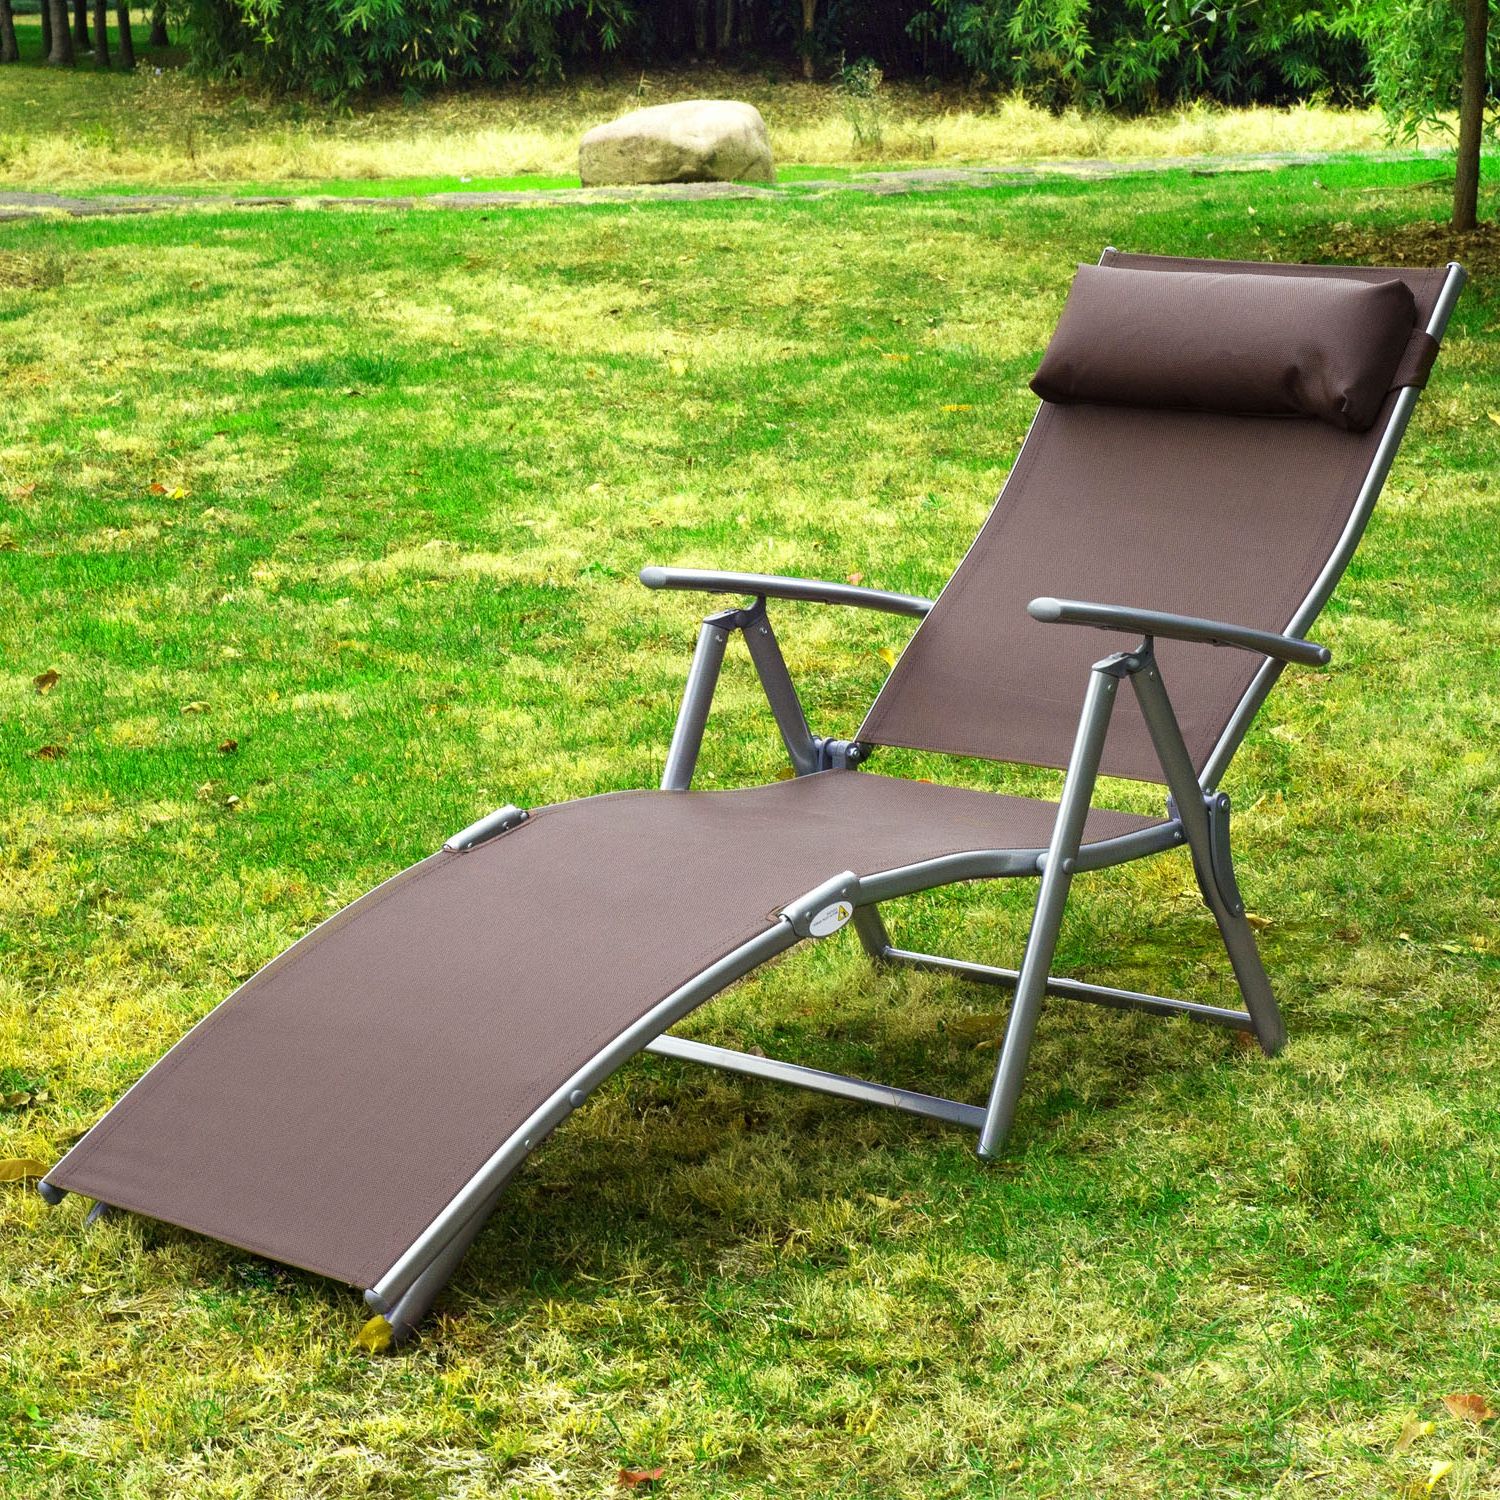 Adjustable Outdoor Lounger Chairs Inside Most Recently Released Outsunny Heavy Duty Adjustable Folding Reclining Chair Outdoor Sun (View 3 of 15)